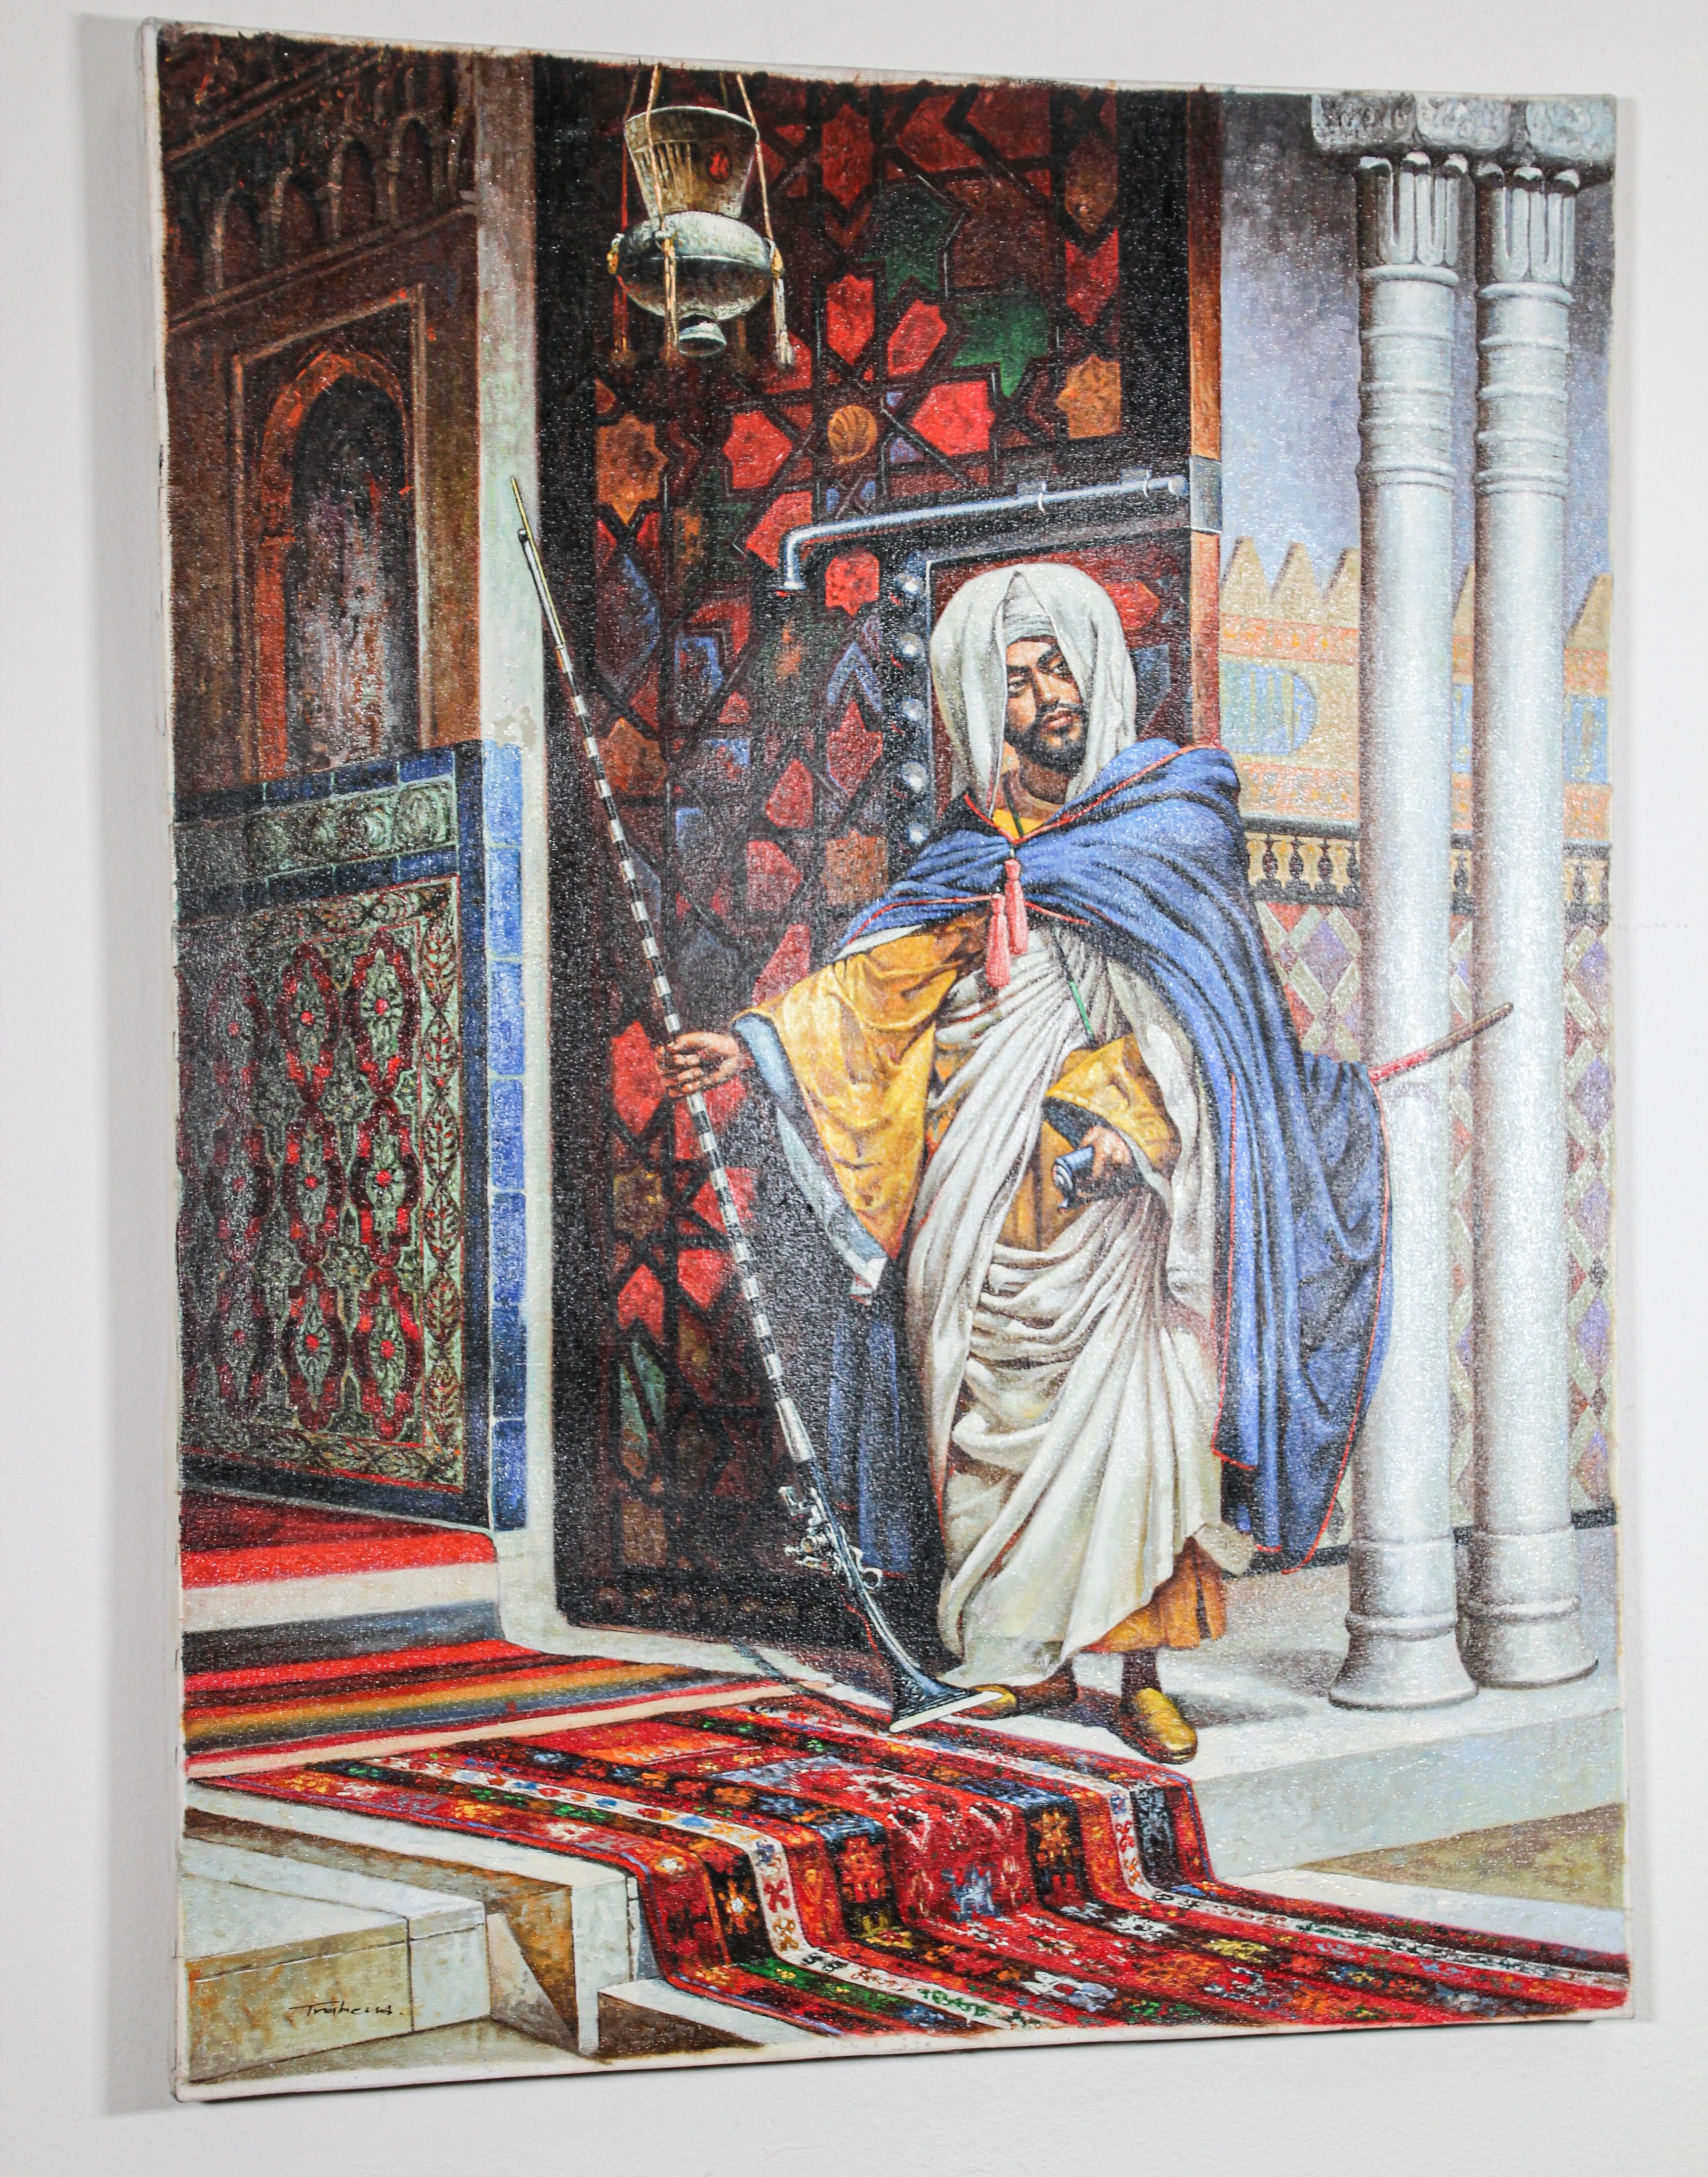 Moroccan orientalist oil on canvas painting of a 19th century Moroccan scene.
A Moorish men standing in front of a house wearing traditional costume, bright colors.
The background depict the front of a palace with a very massive wood carved door